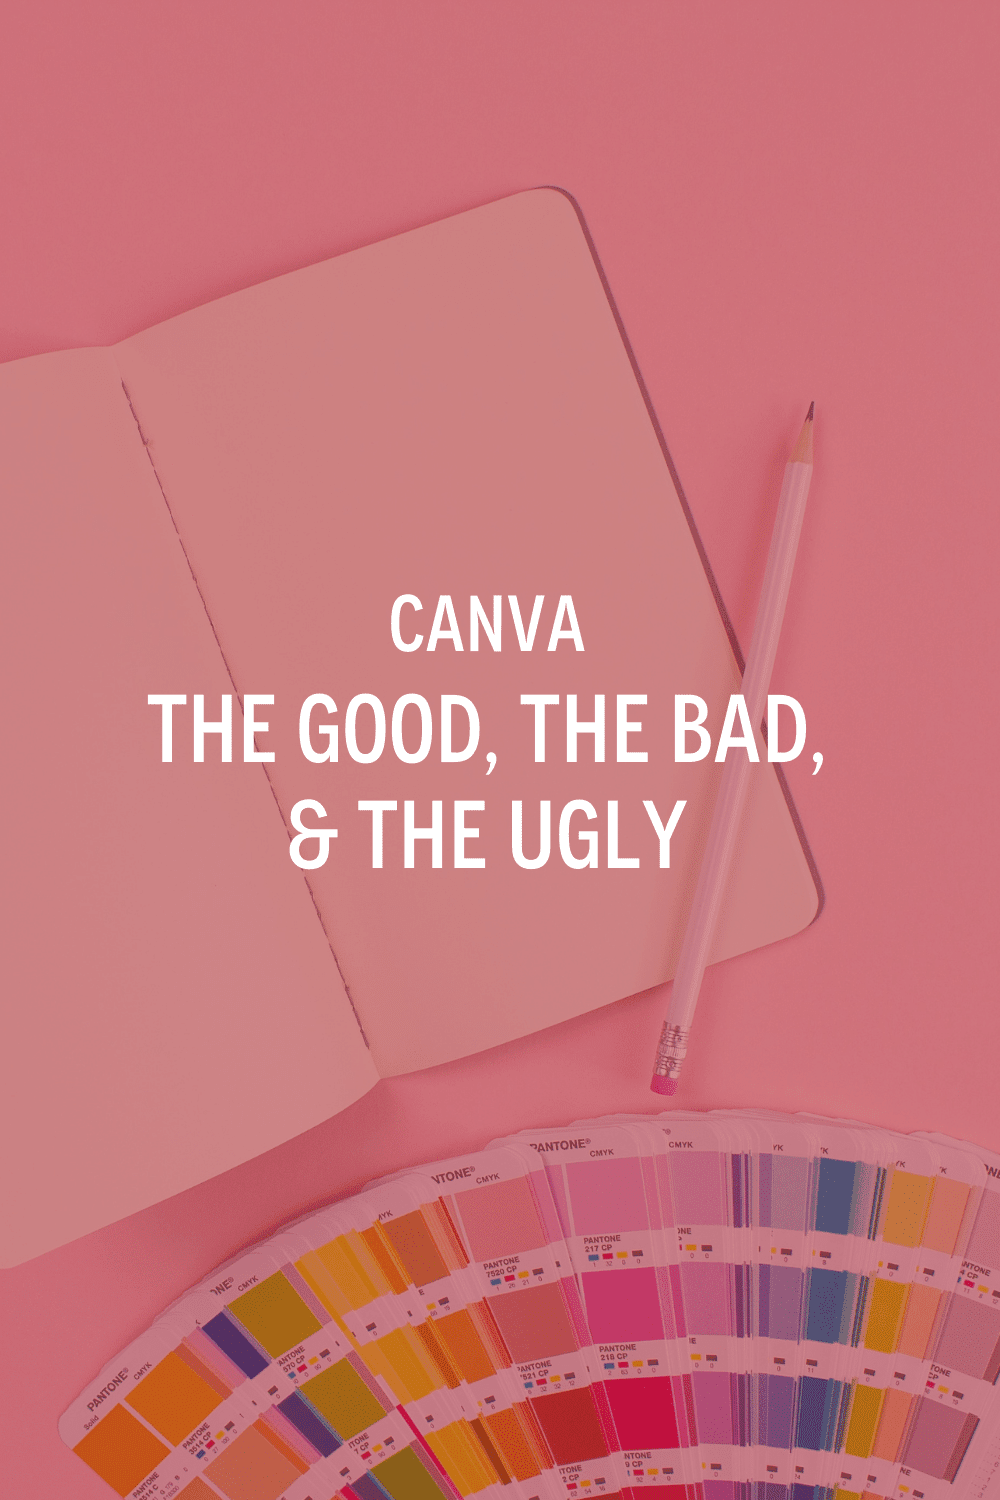 Canva: The Good, The Bad, & The Ugly | * Enterprise by Design *